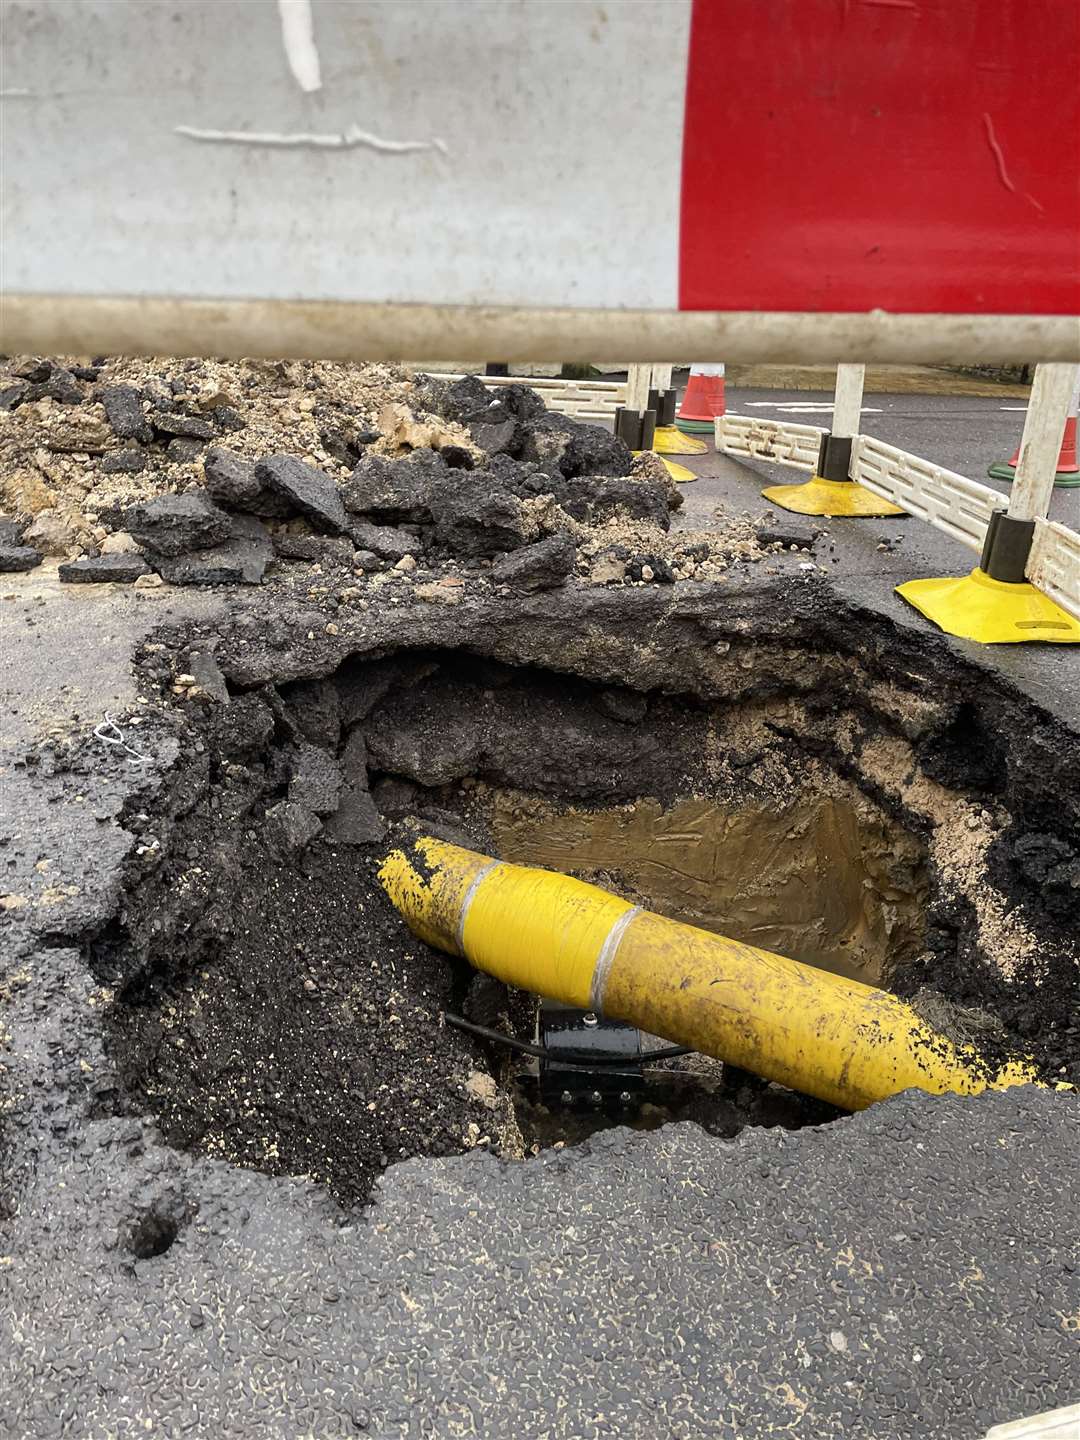 The gas pipe which was ruptured after the water main below burst on Friday night in Stannington, Sheffield, flooding the local gas network (Dave Higgens/PA)